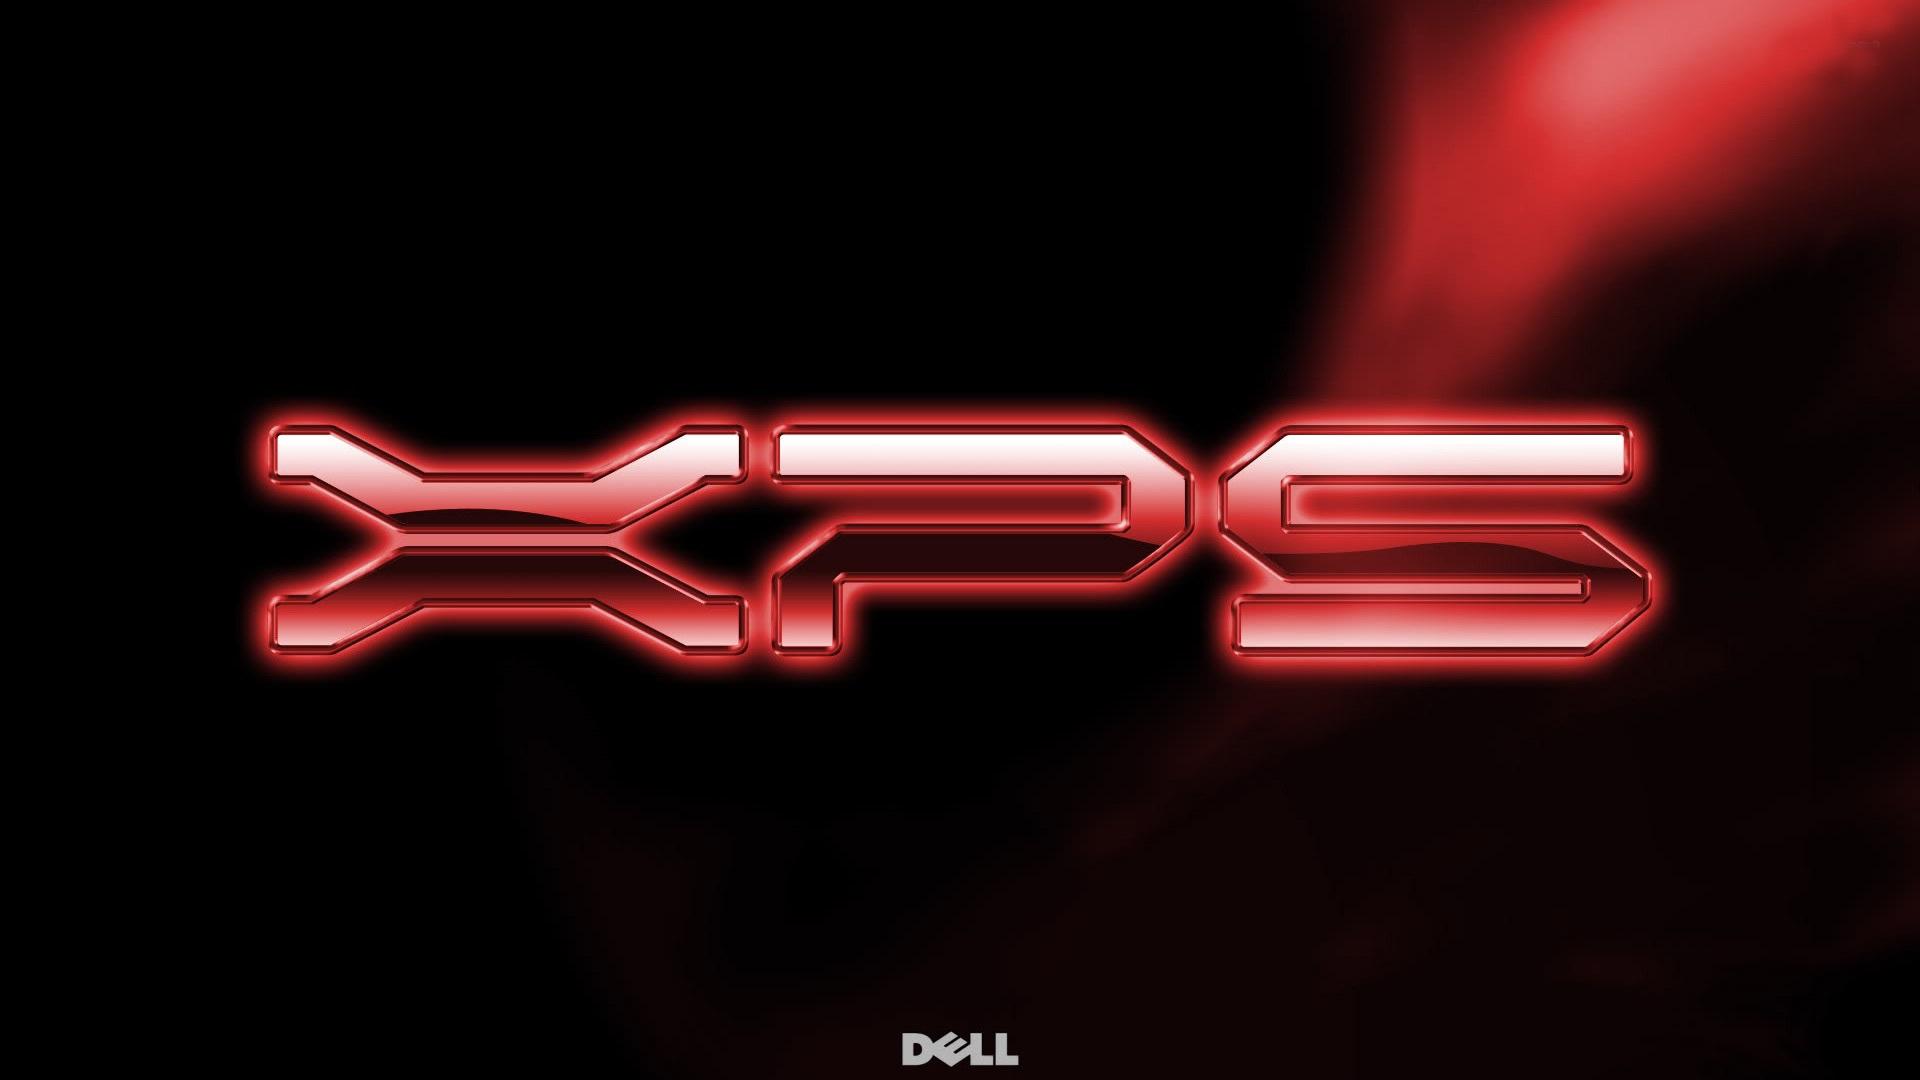 Wallpaper Dell XPS logo 1920x1080 Full HD 2K Picture, Image